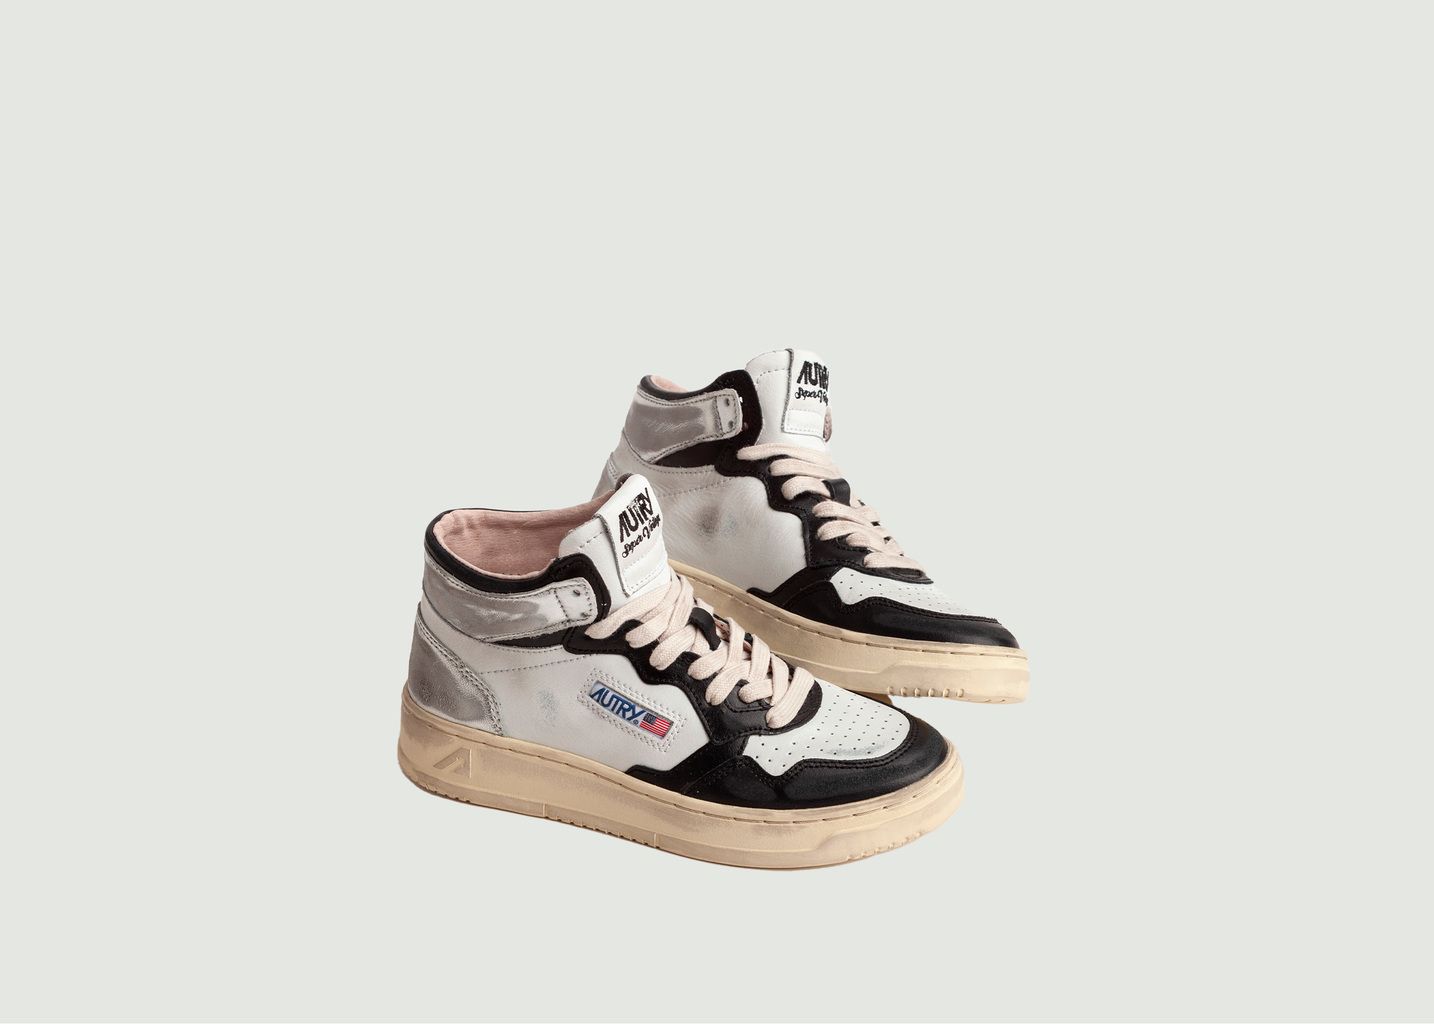 Vintage leather three-tone high top sneakers - AUTRY